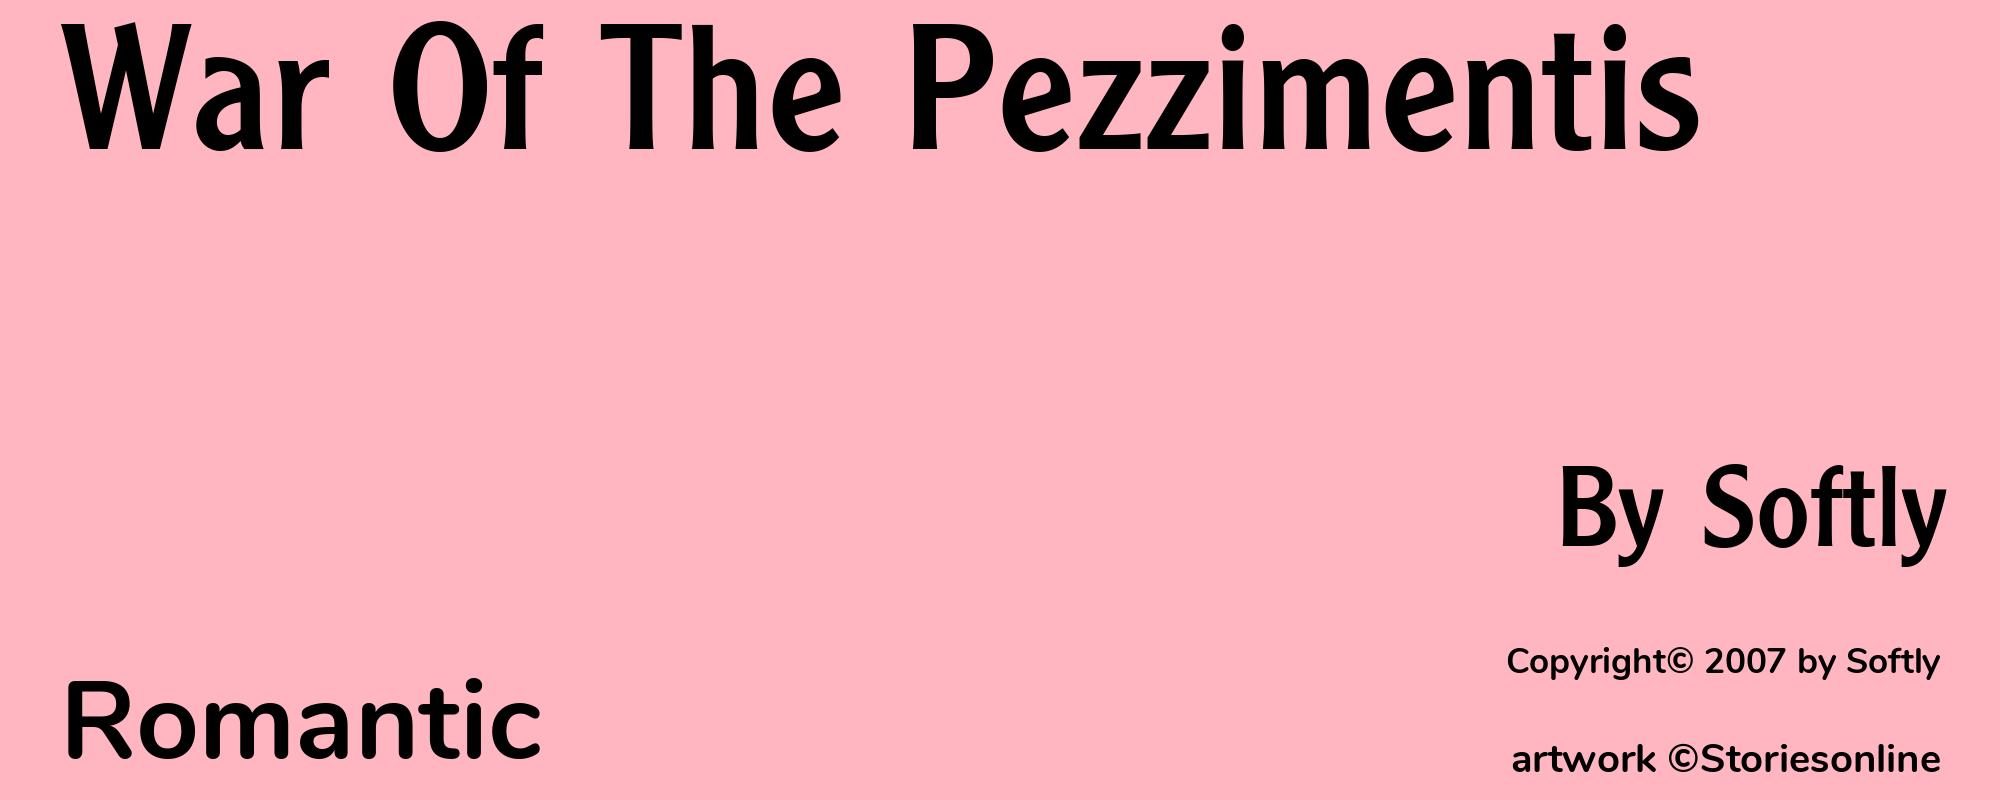 War Of The Pezzimentis - Cover